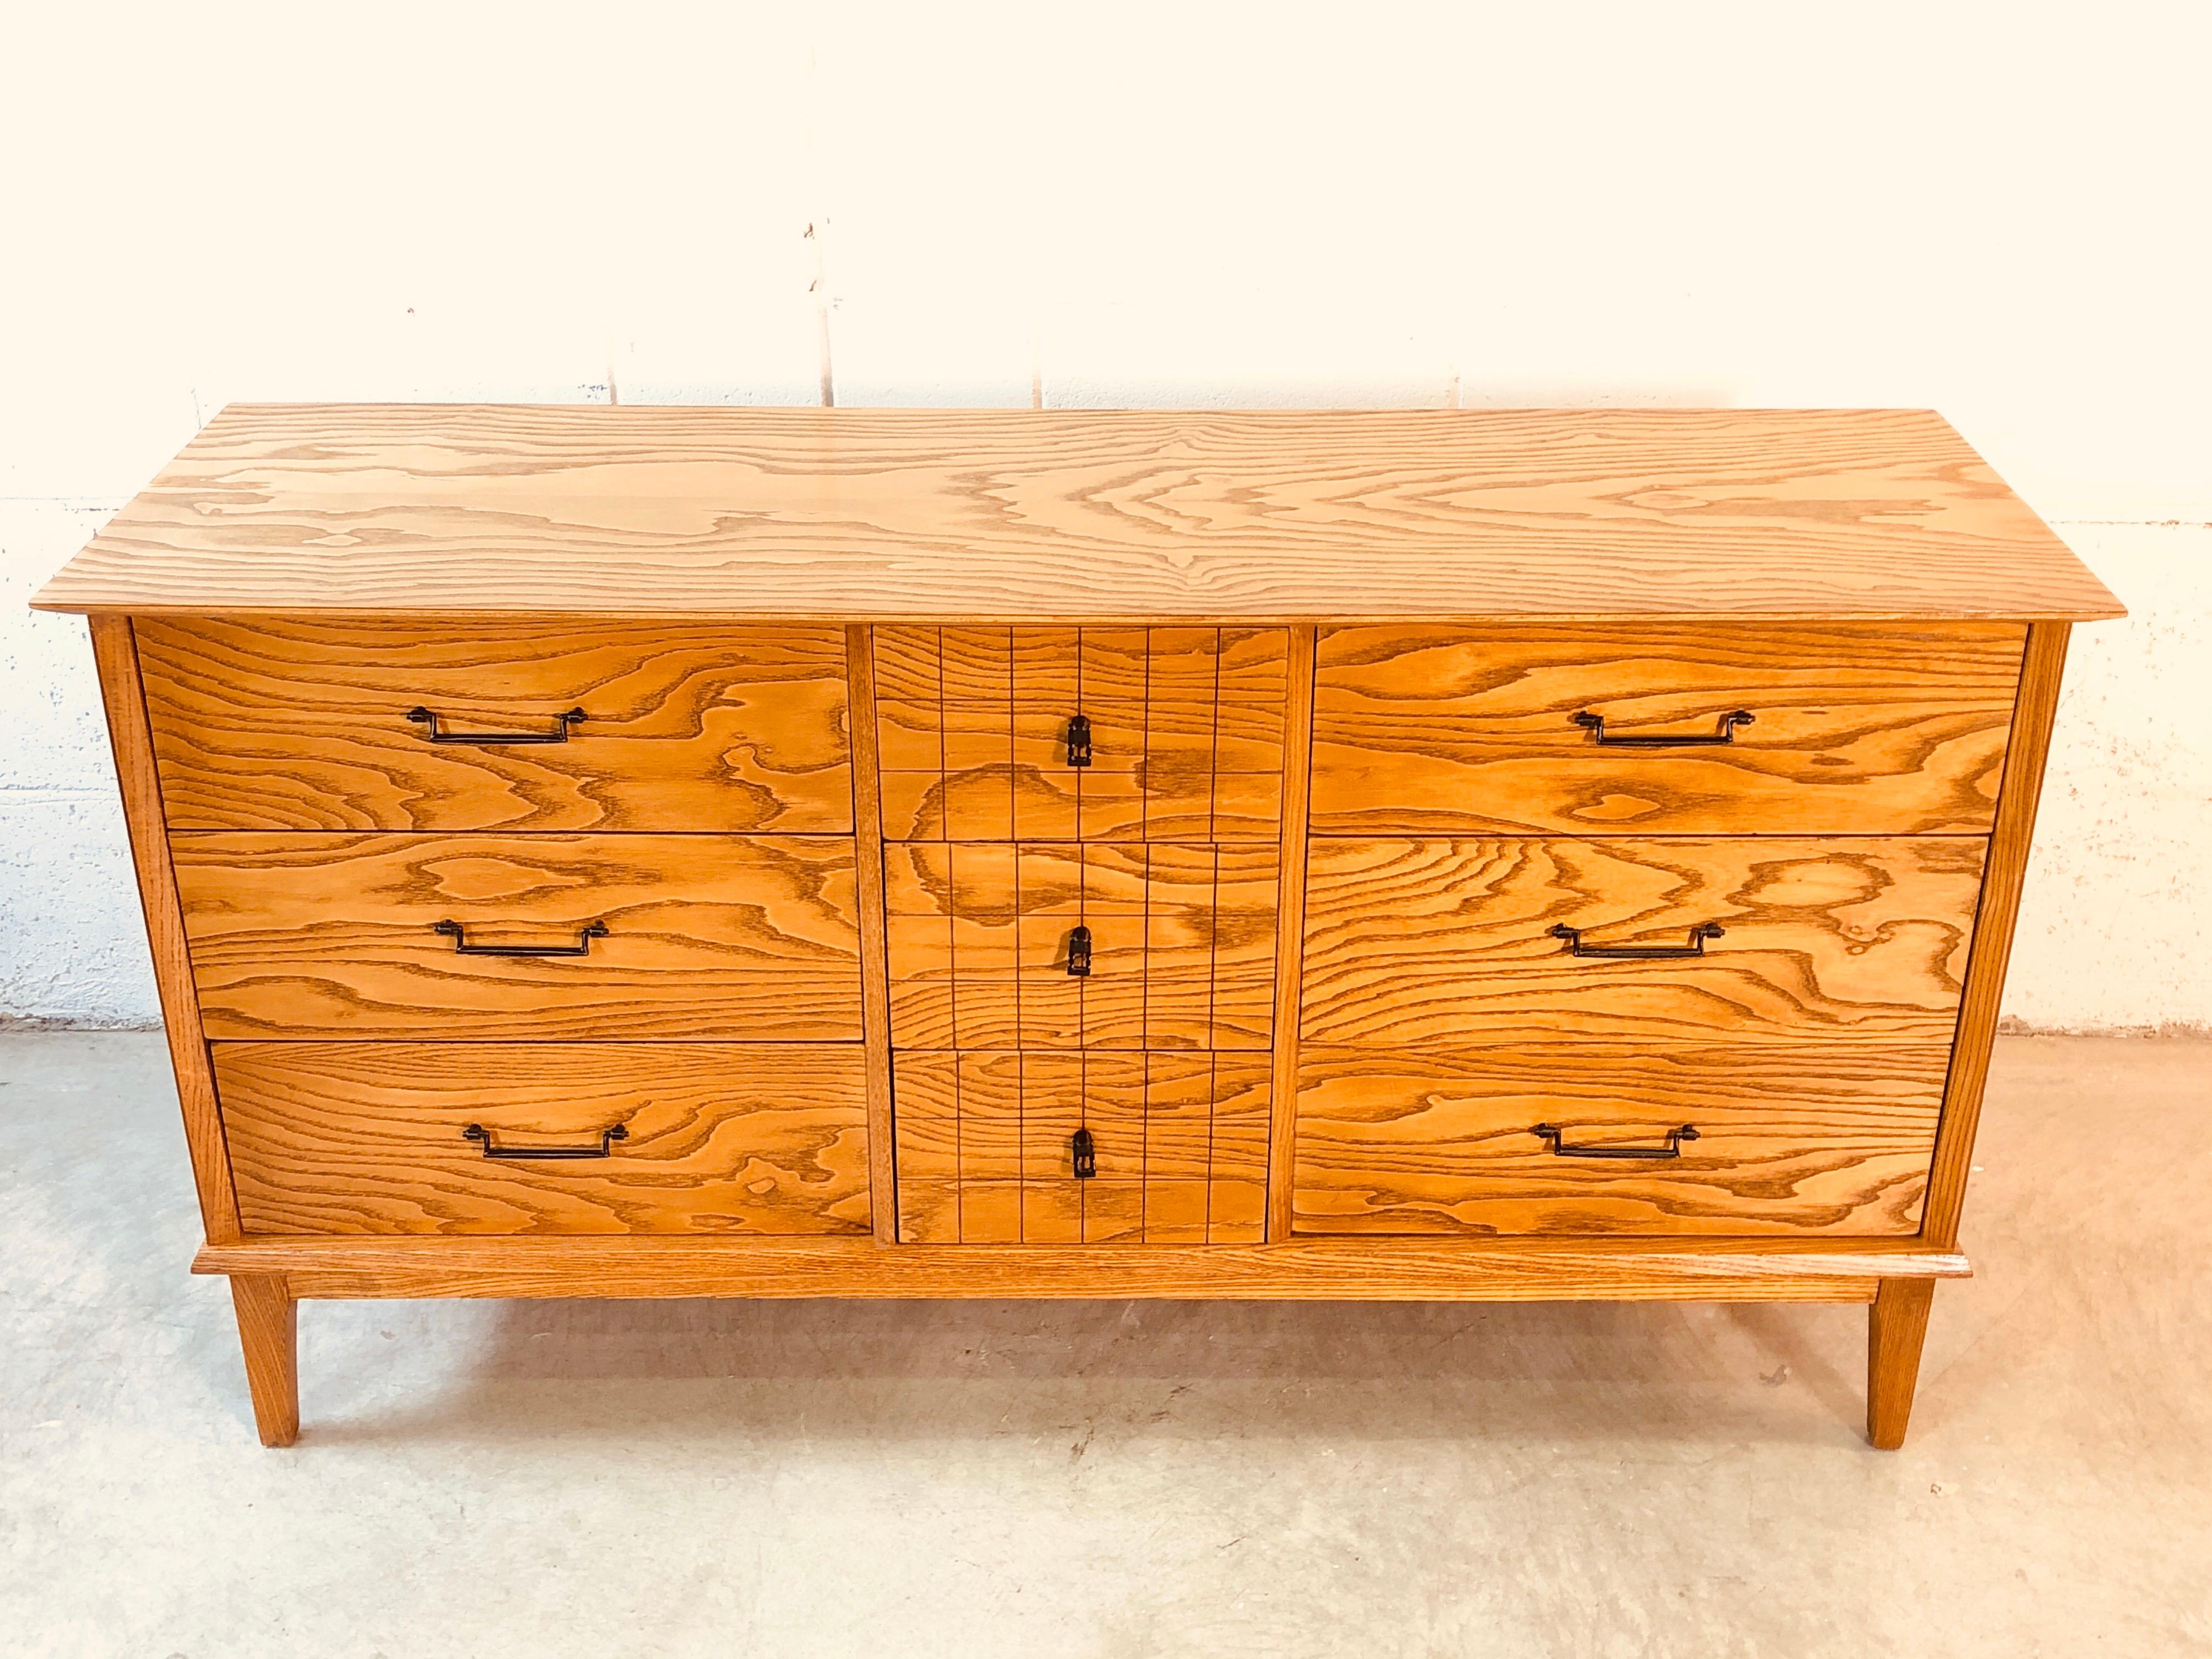 1960s solid oakwood dresser with a dark wood grain. The dresser has nine drawers for storage. It is fully refinished and the grain is beautiful! There are no marks. Excellent condition.